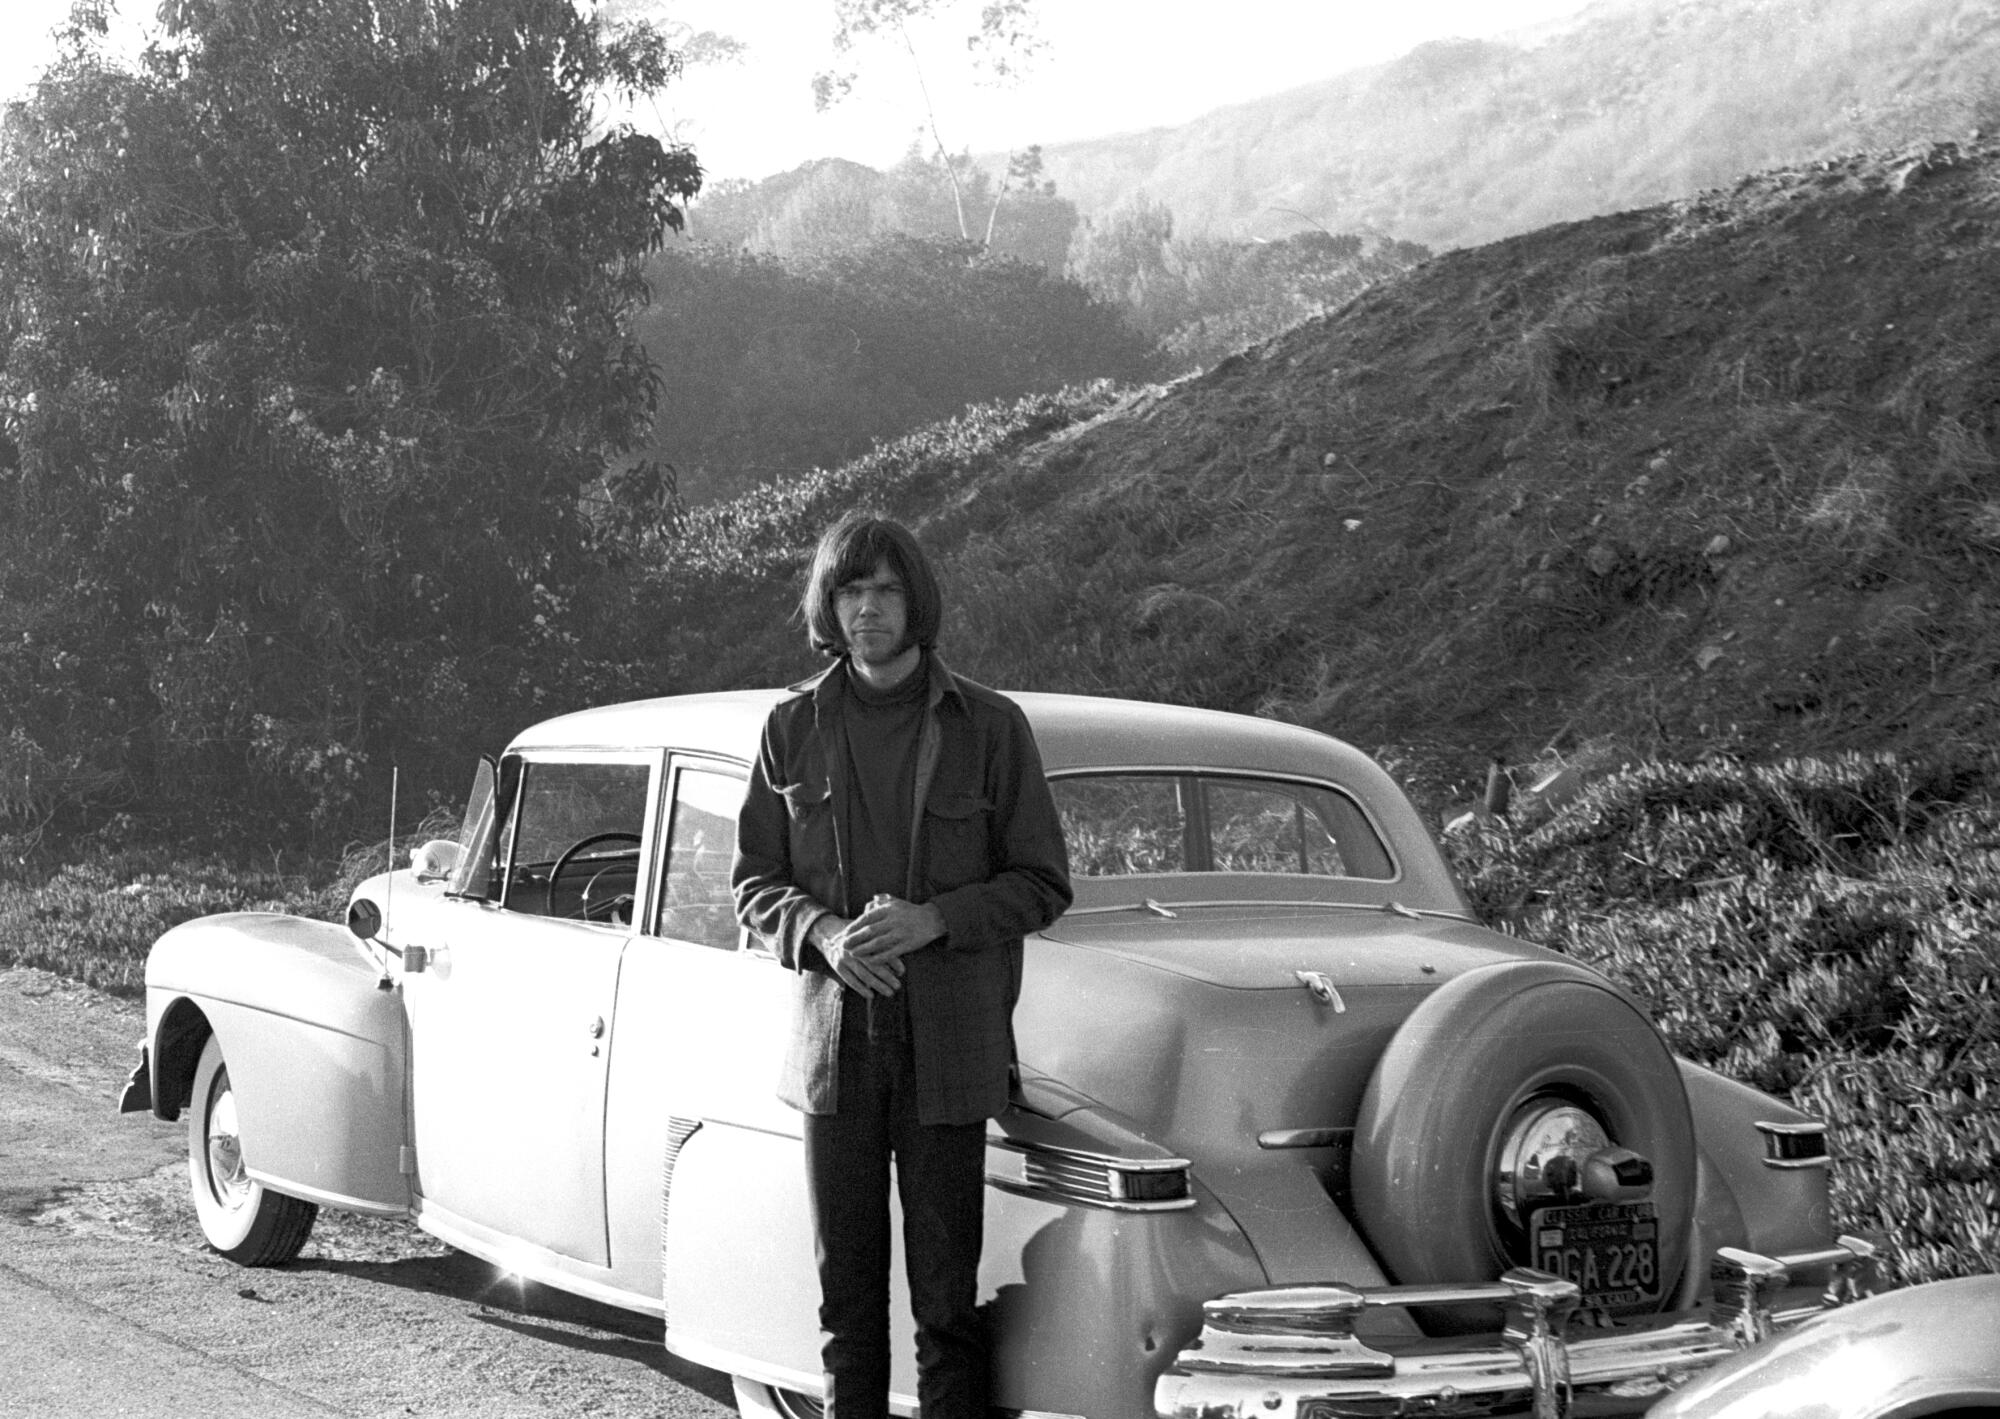 Neil Young in 1967 standing in front of a vintage car amid mountains